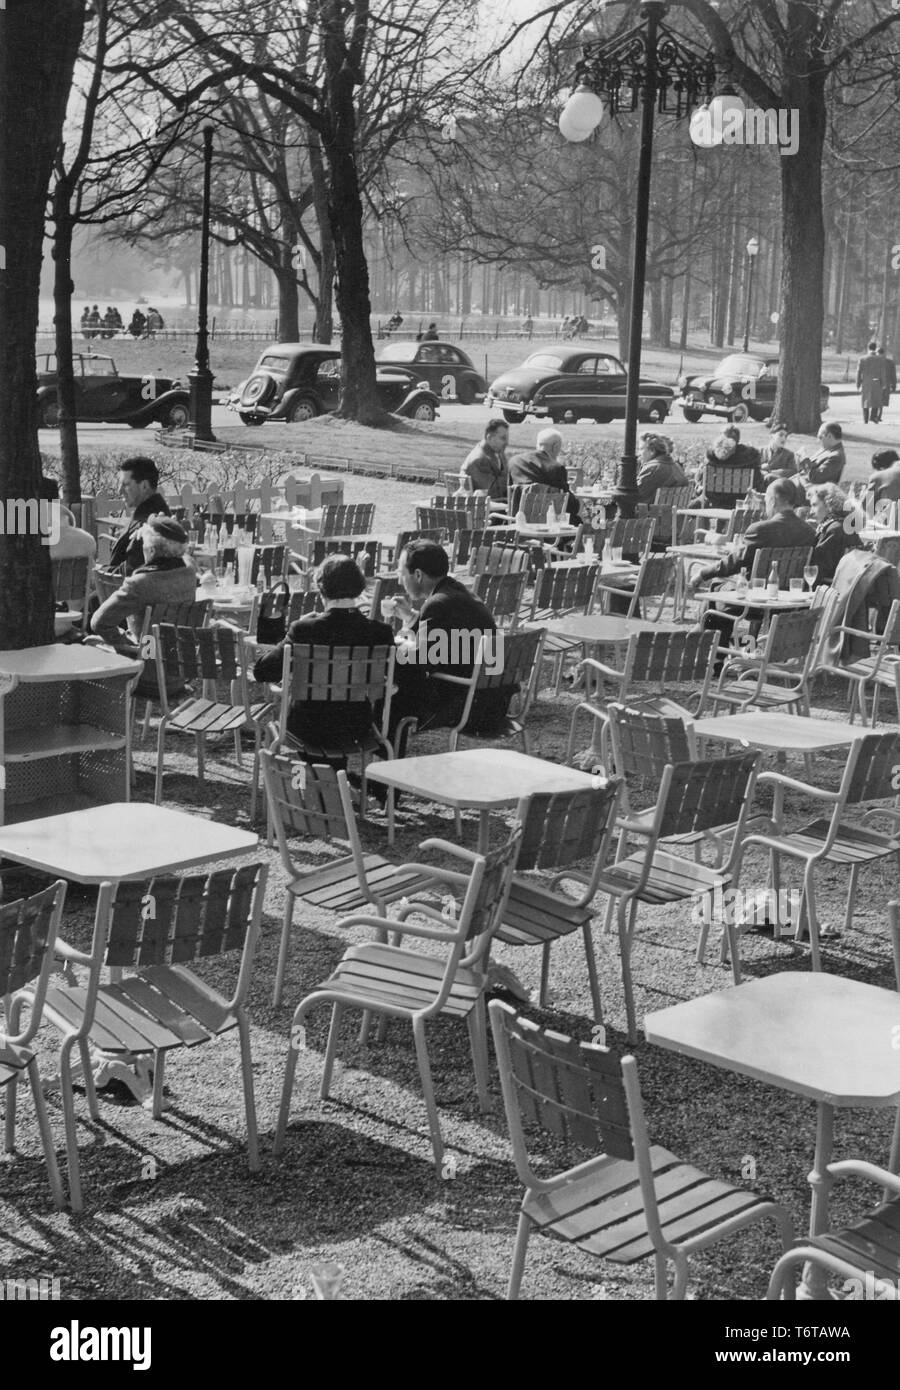 1950s open-air cafe. On this spring day people have found the cafe a nice place to enjoy the sunshine while eating and drinking. Sweden 1950s Stock Photo